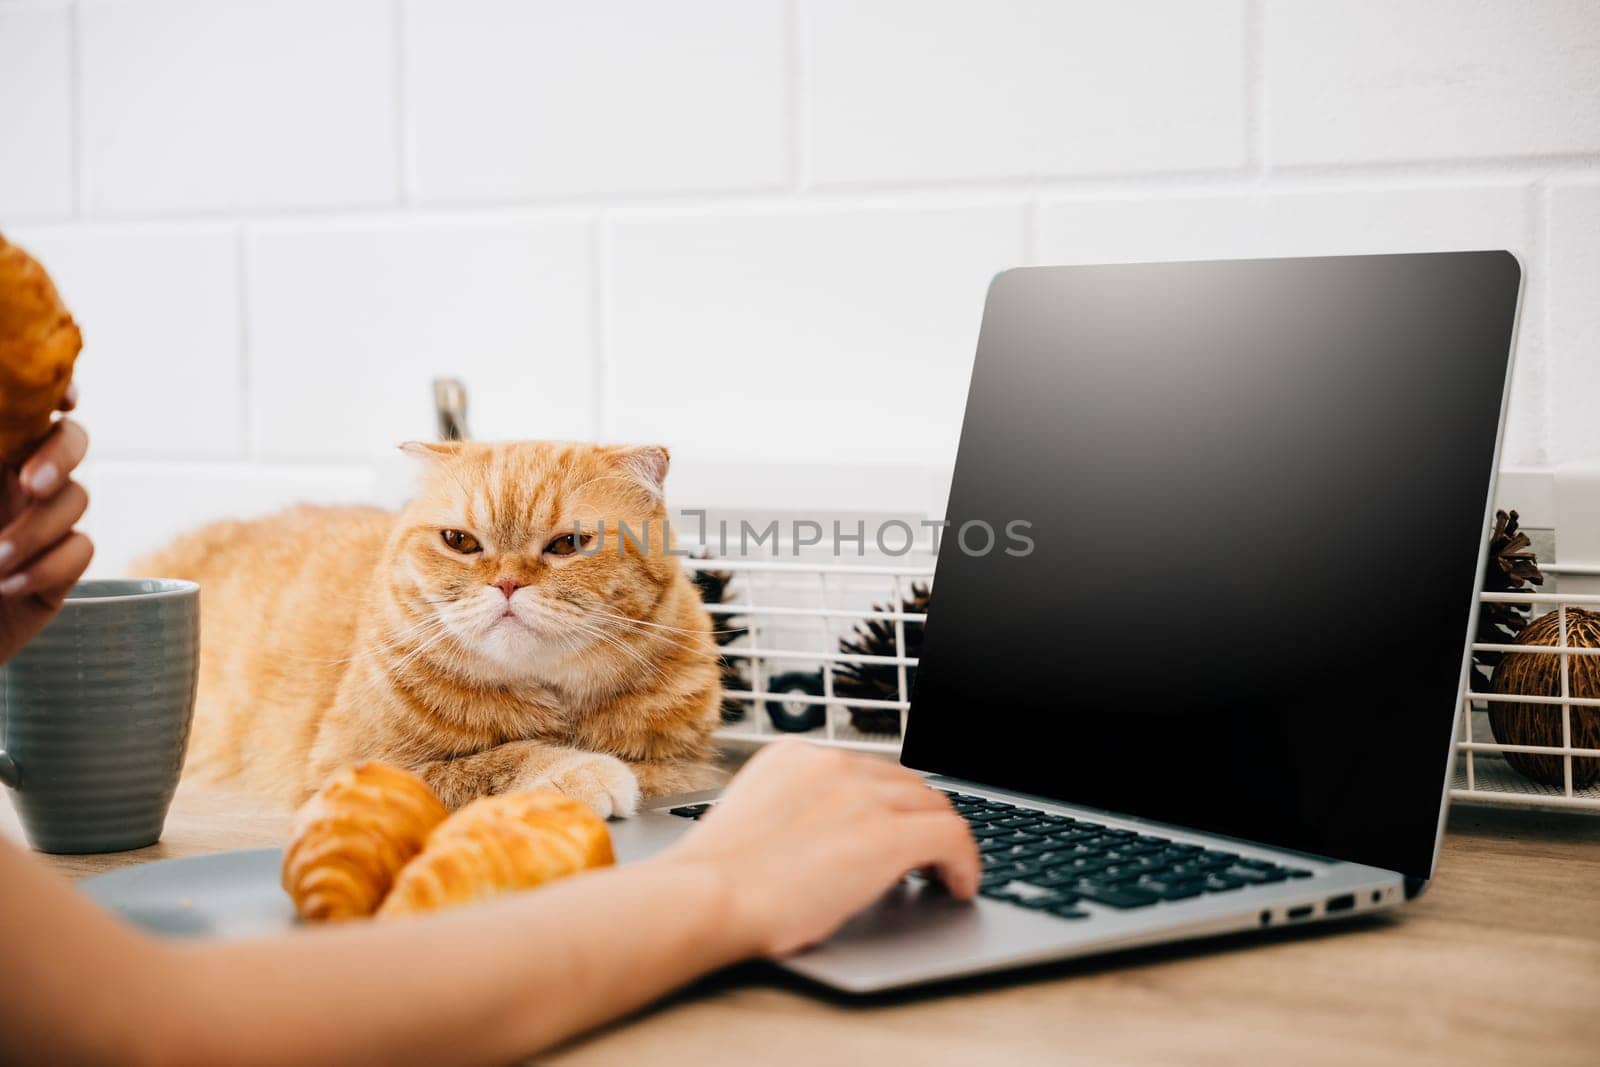 In this portrait, a woman enjoys the togetherness of her Scottish Fold cat while working at her desk with a laptop. Their bond represents the delightful fusion of work and pet friendship. by Sorapop